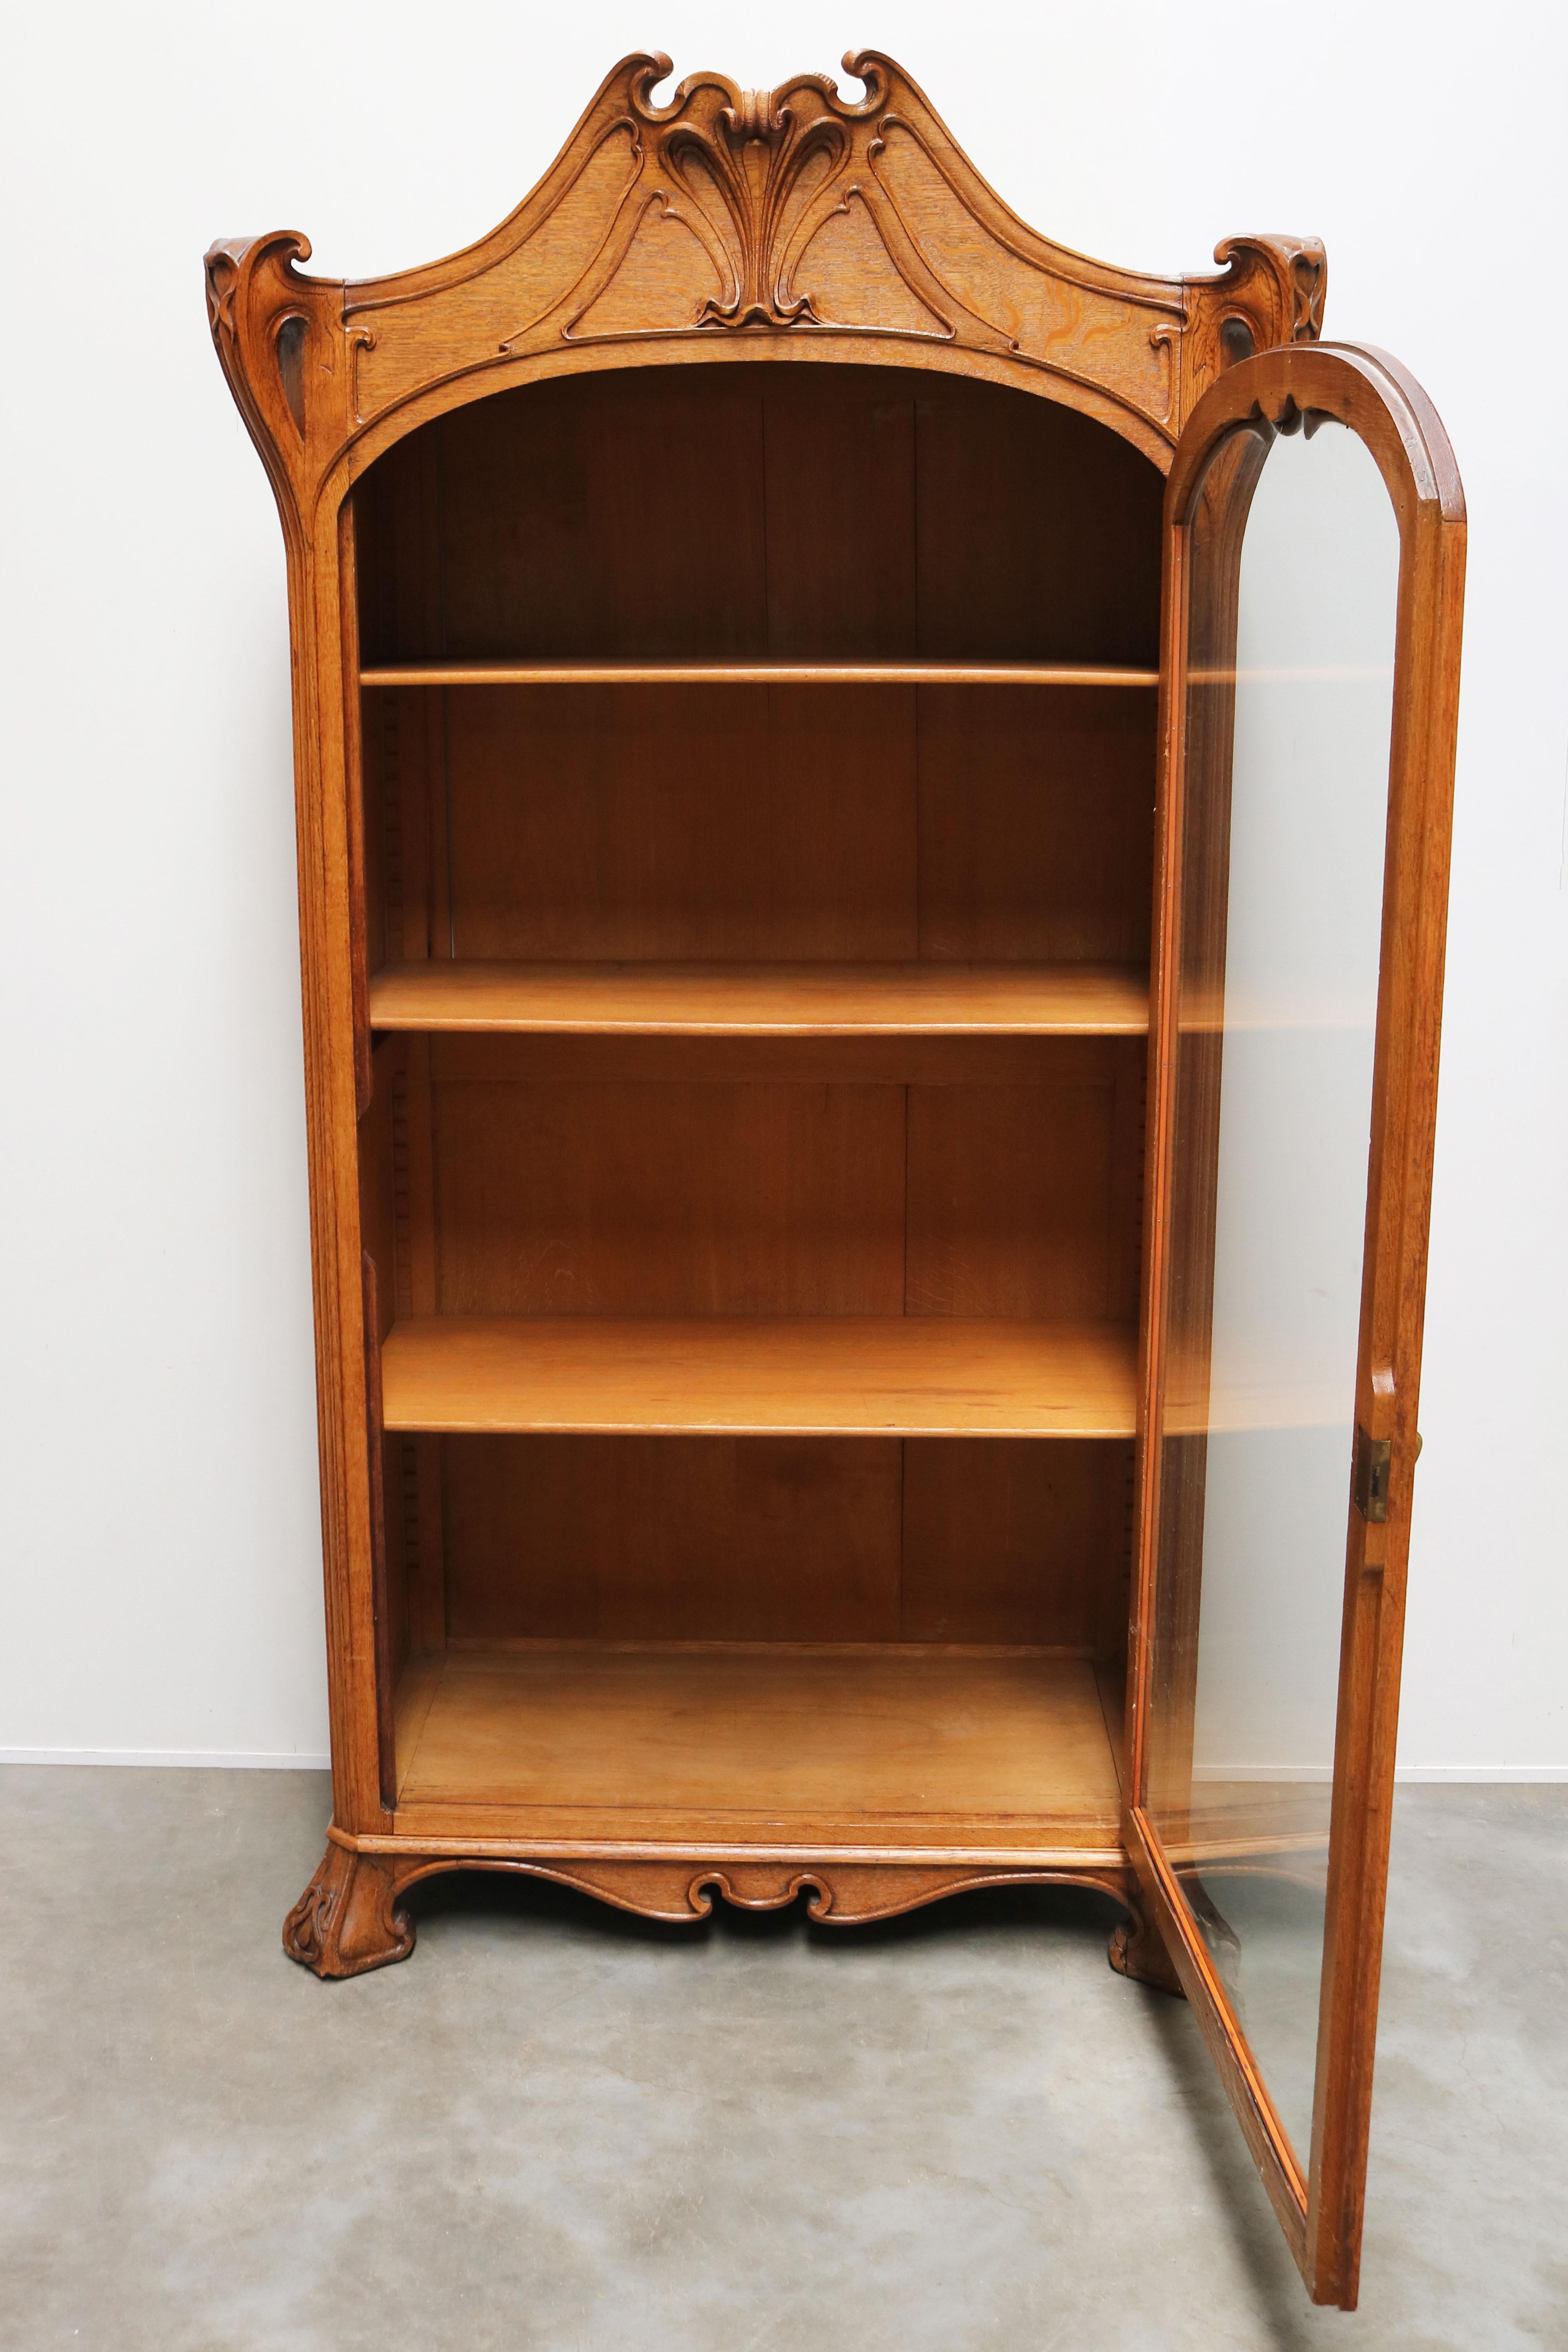 Antique French Art Nouveau Cabinet by Henri Sauvage 1900 Oak Display Cabinet For Sale 6